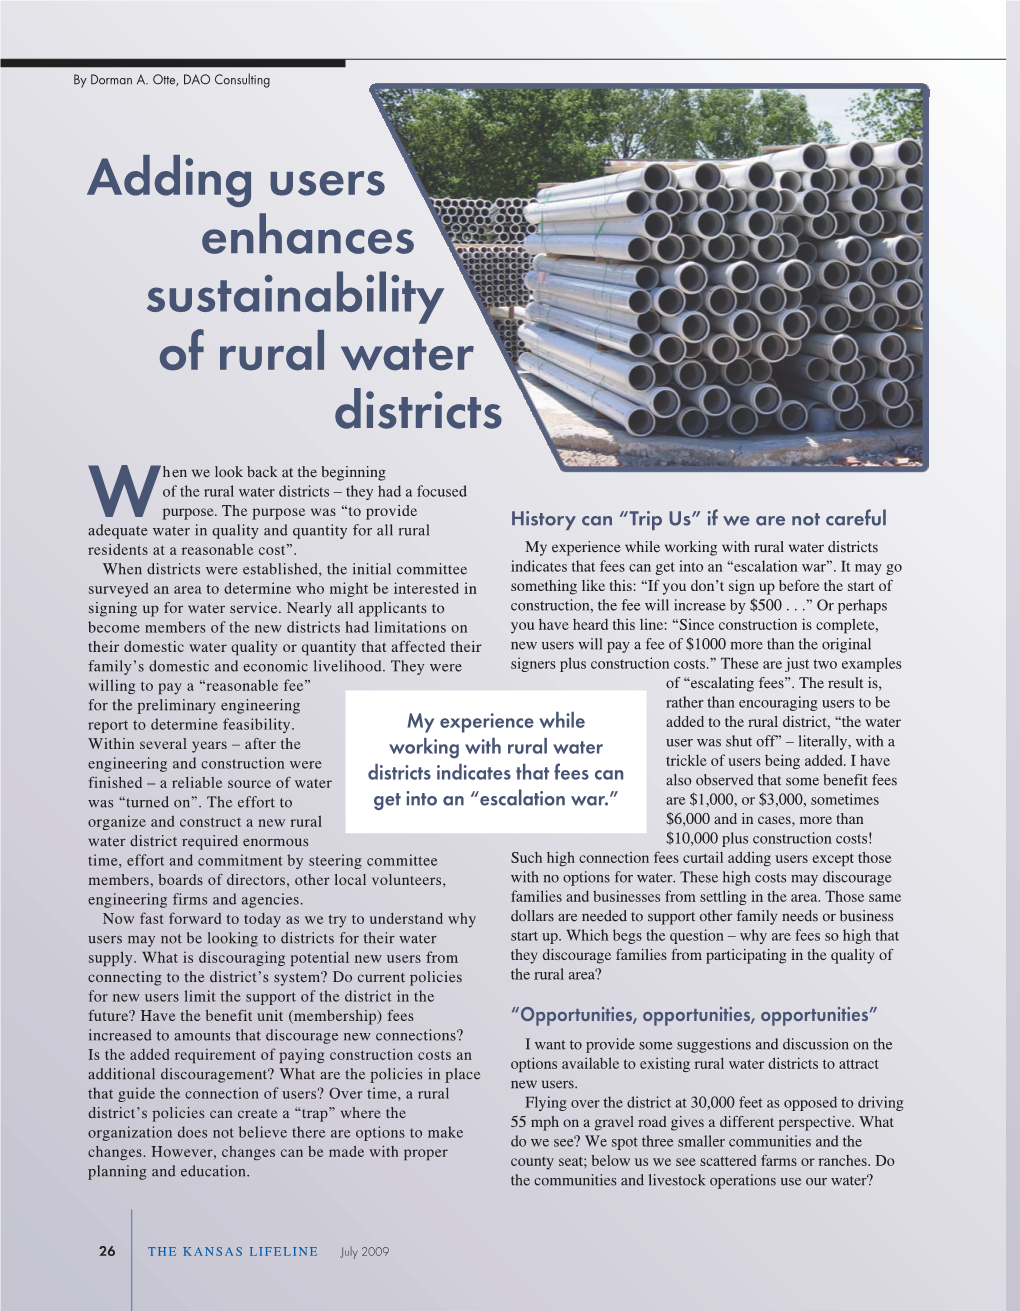 Adding Users Enhances Sustainability of Rural Water Districts